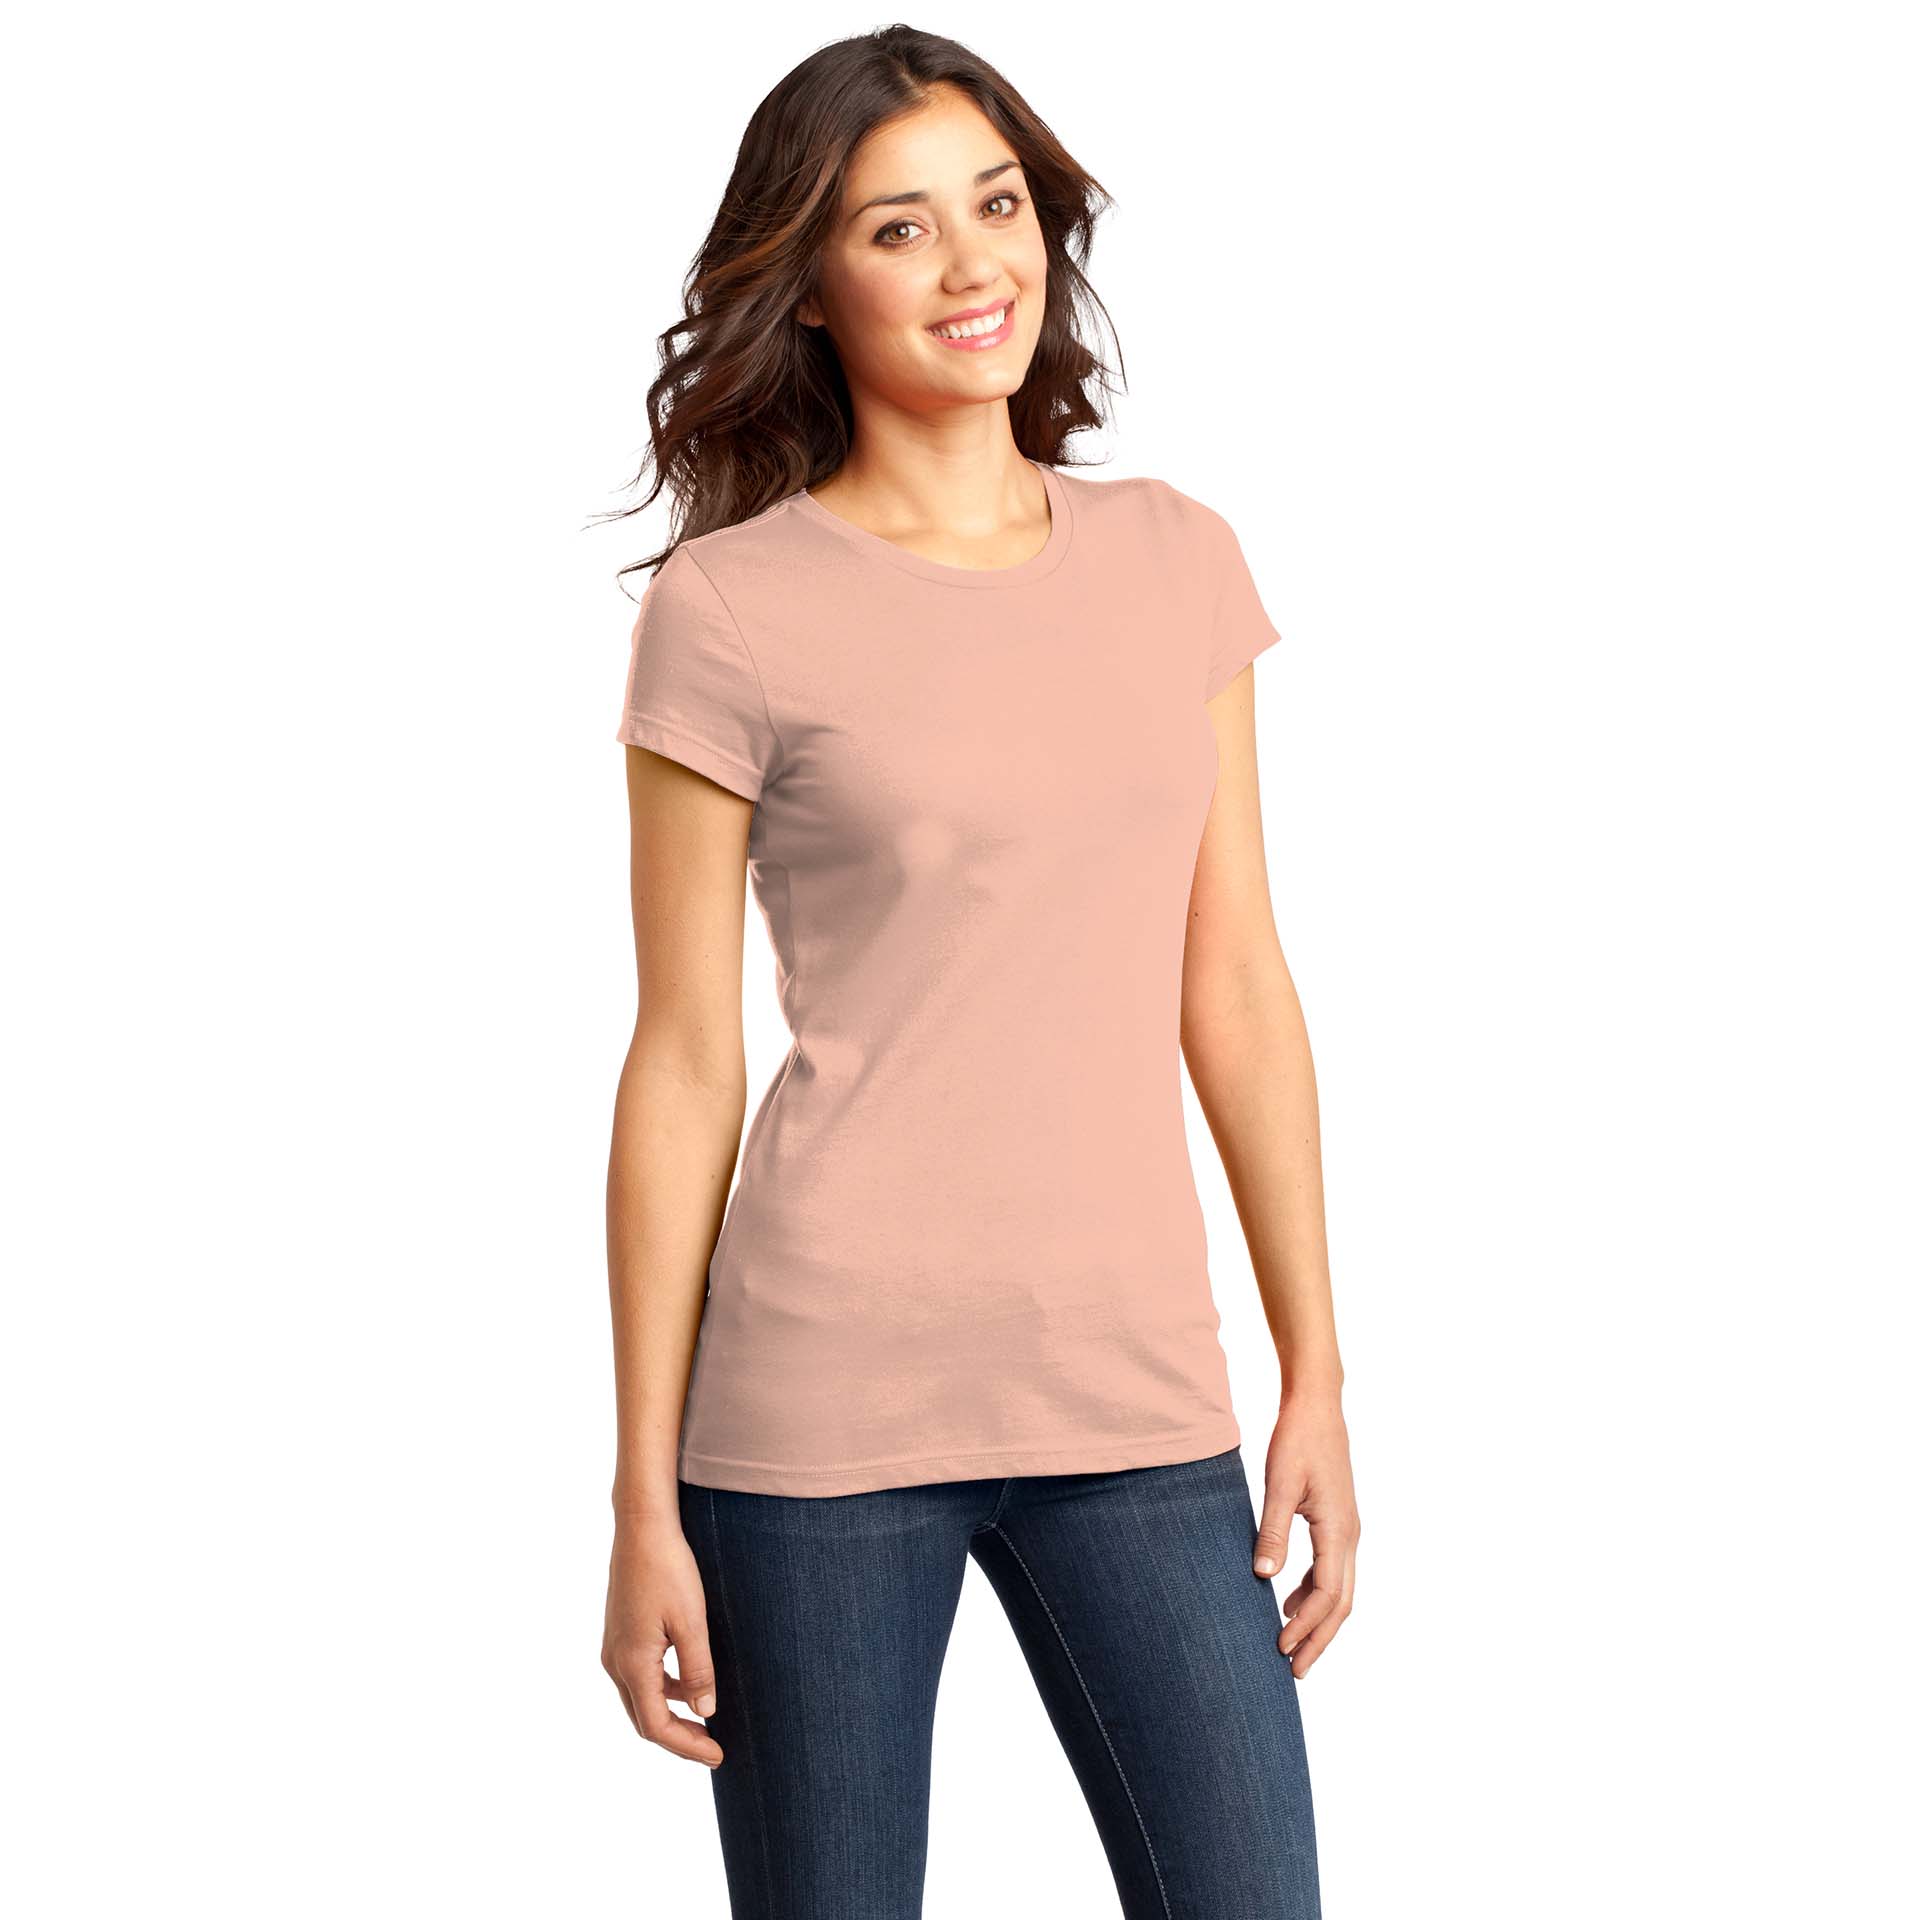 District DT6001 Women's Fitted Very Important Tee - Dusty Peach ...